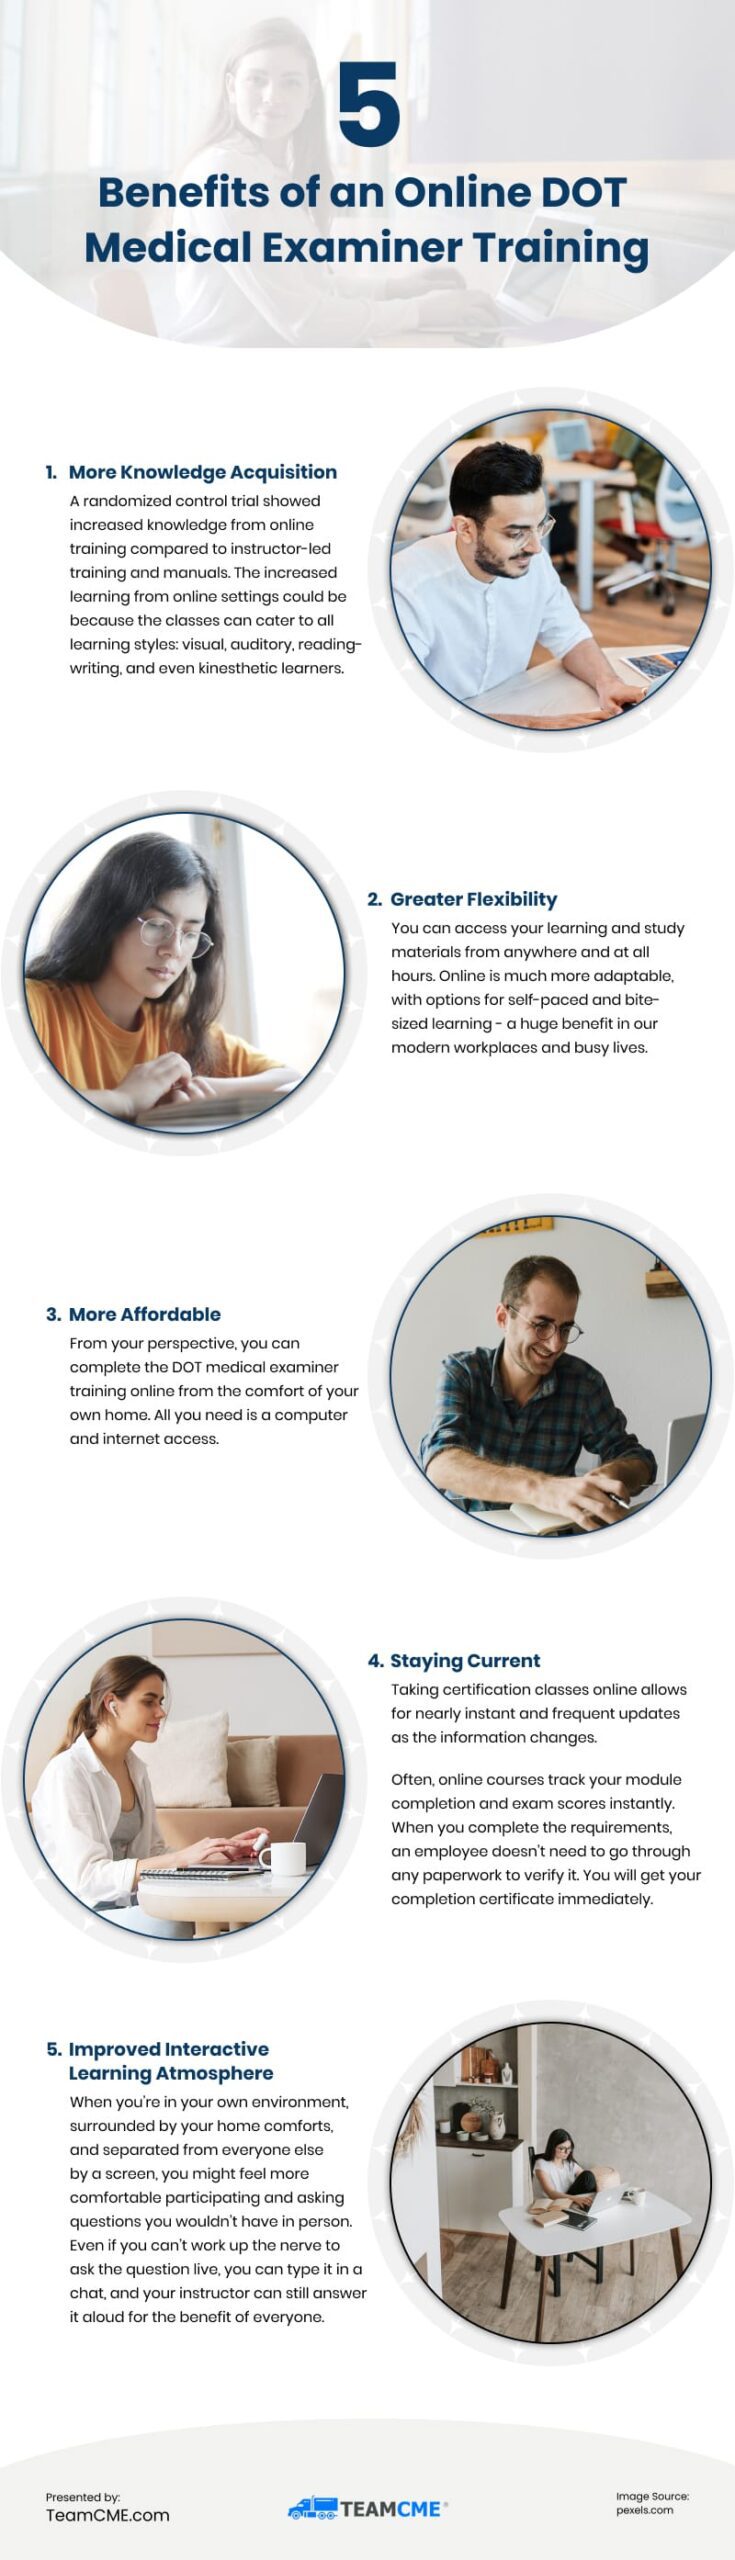 5 Benefits of an Online DOT Medical Examiner Training Infographic